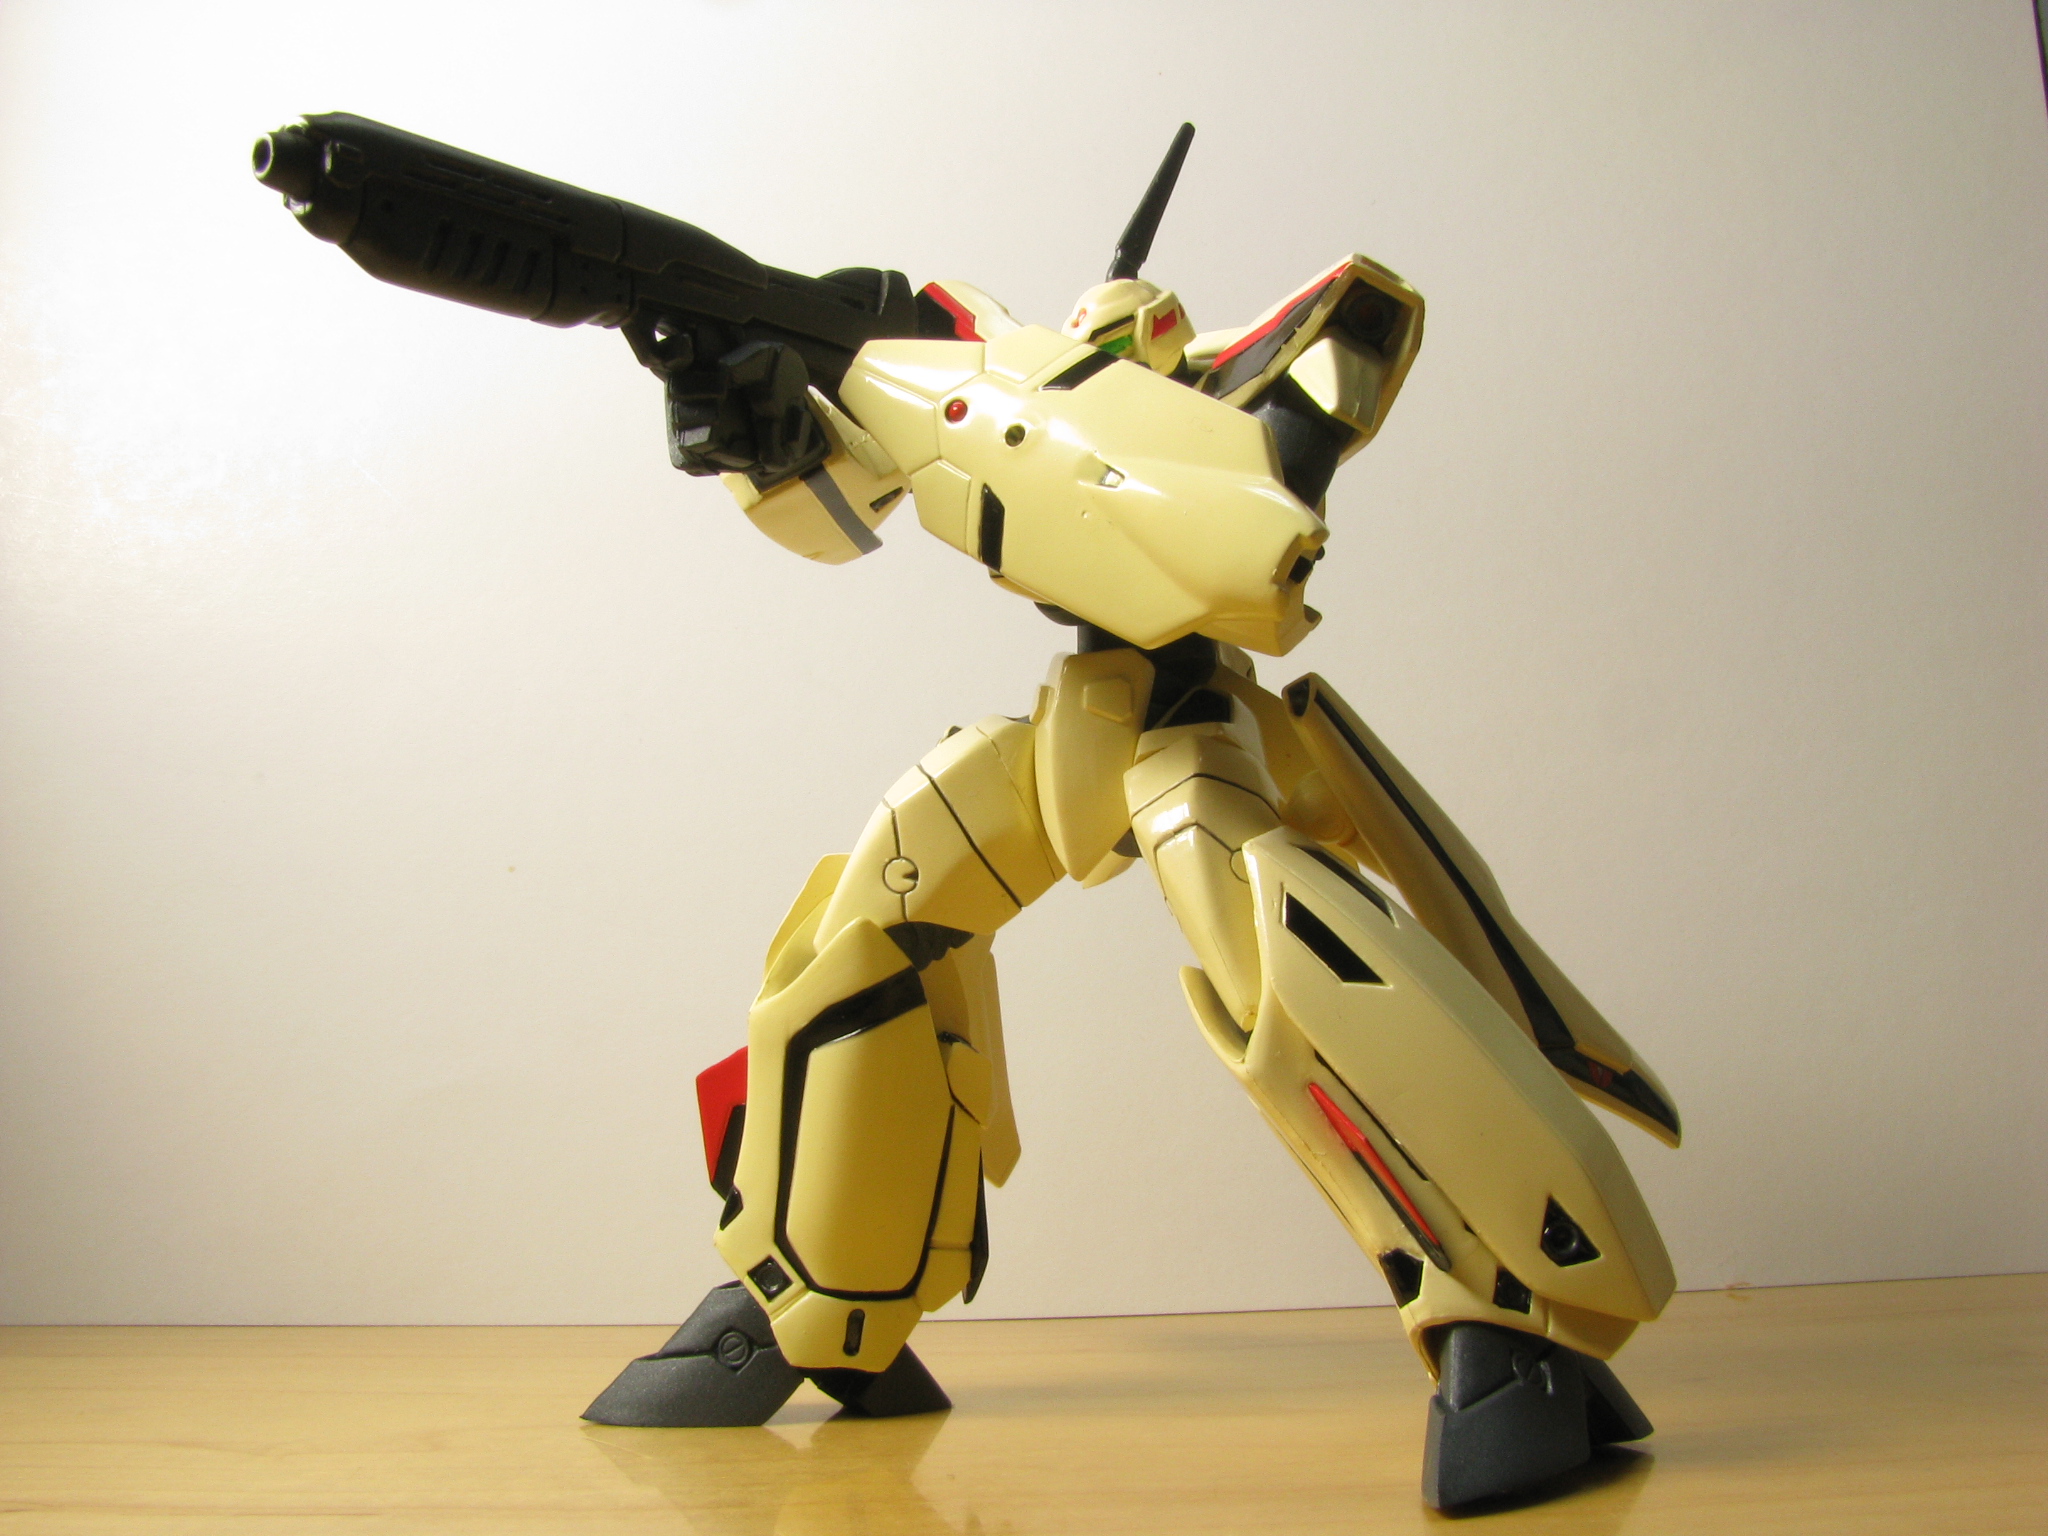 a toy robot holding a gun in one hand and wearing yellow skin